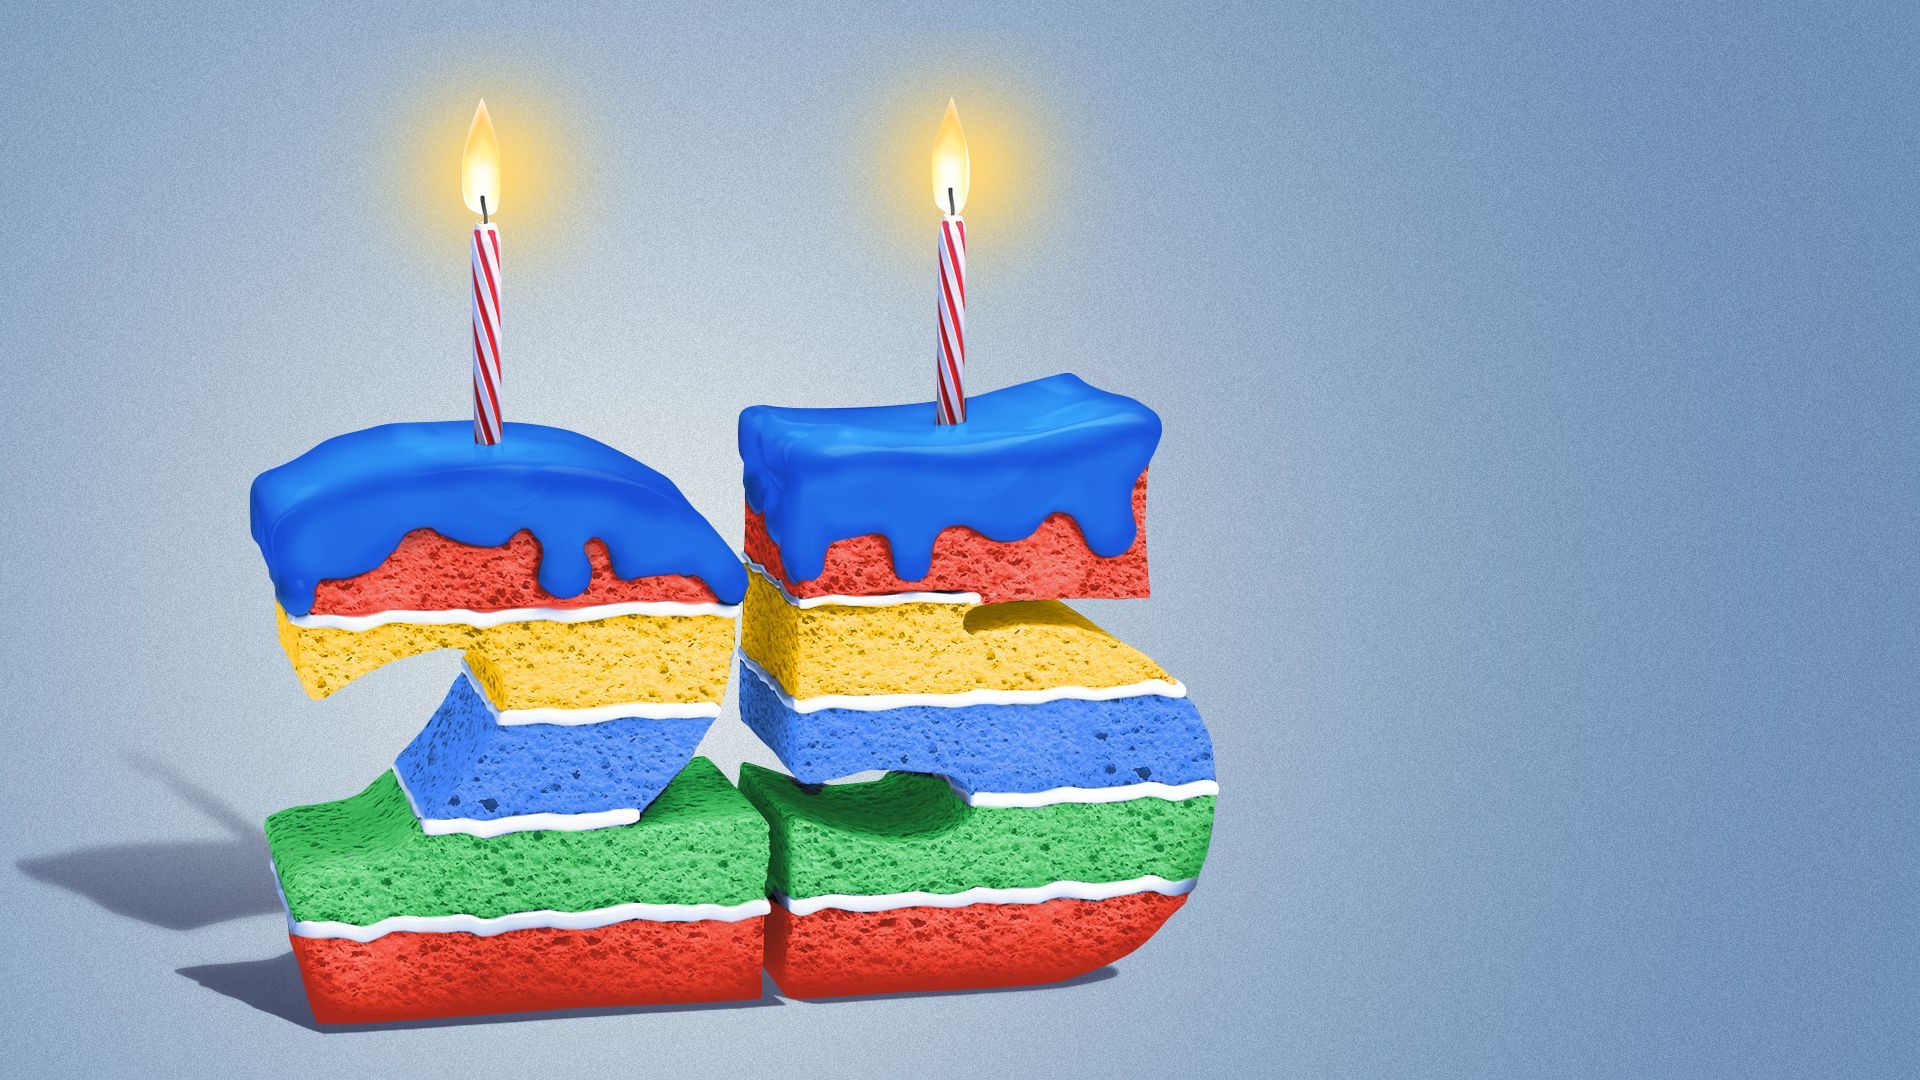 Illustration of the numbers "25" styled as stacked birthday cakes with the sponge layers in the colors of the Google logo, complete with a candle on top of each number. 